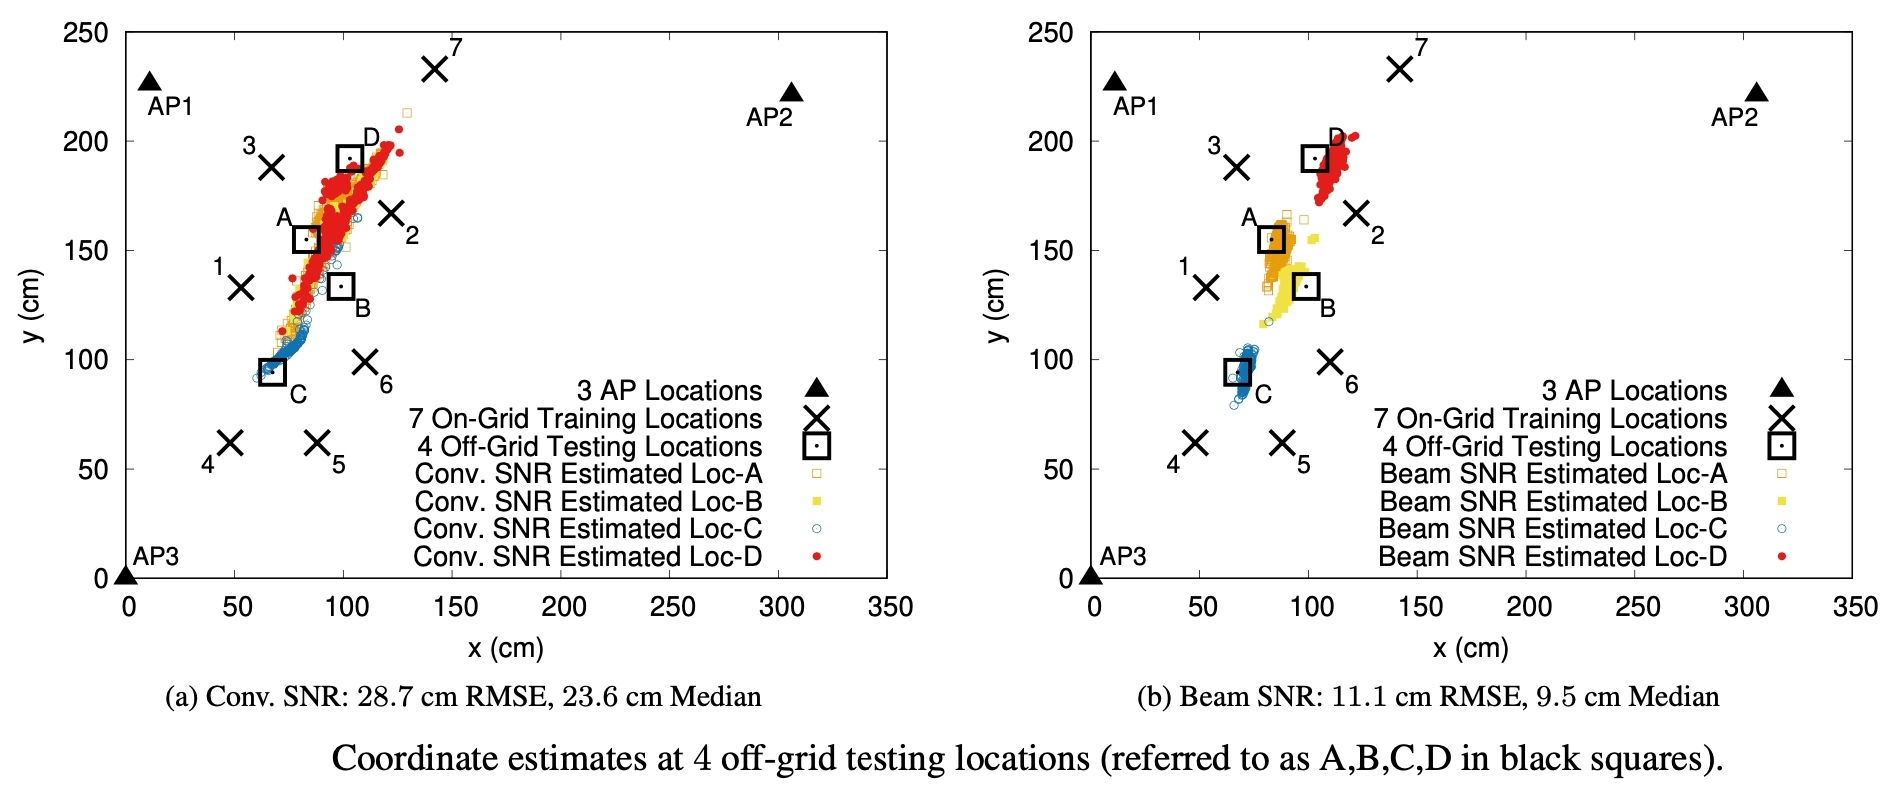 Figure 2: Coordinate estimates at 4 off-grid testing locations (referred to as A,B,C,D in black squares).